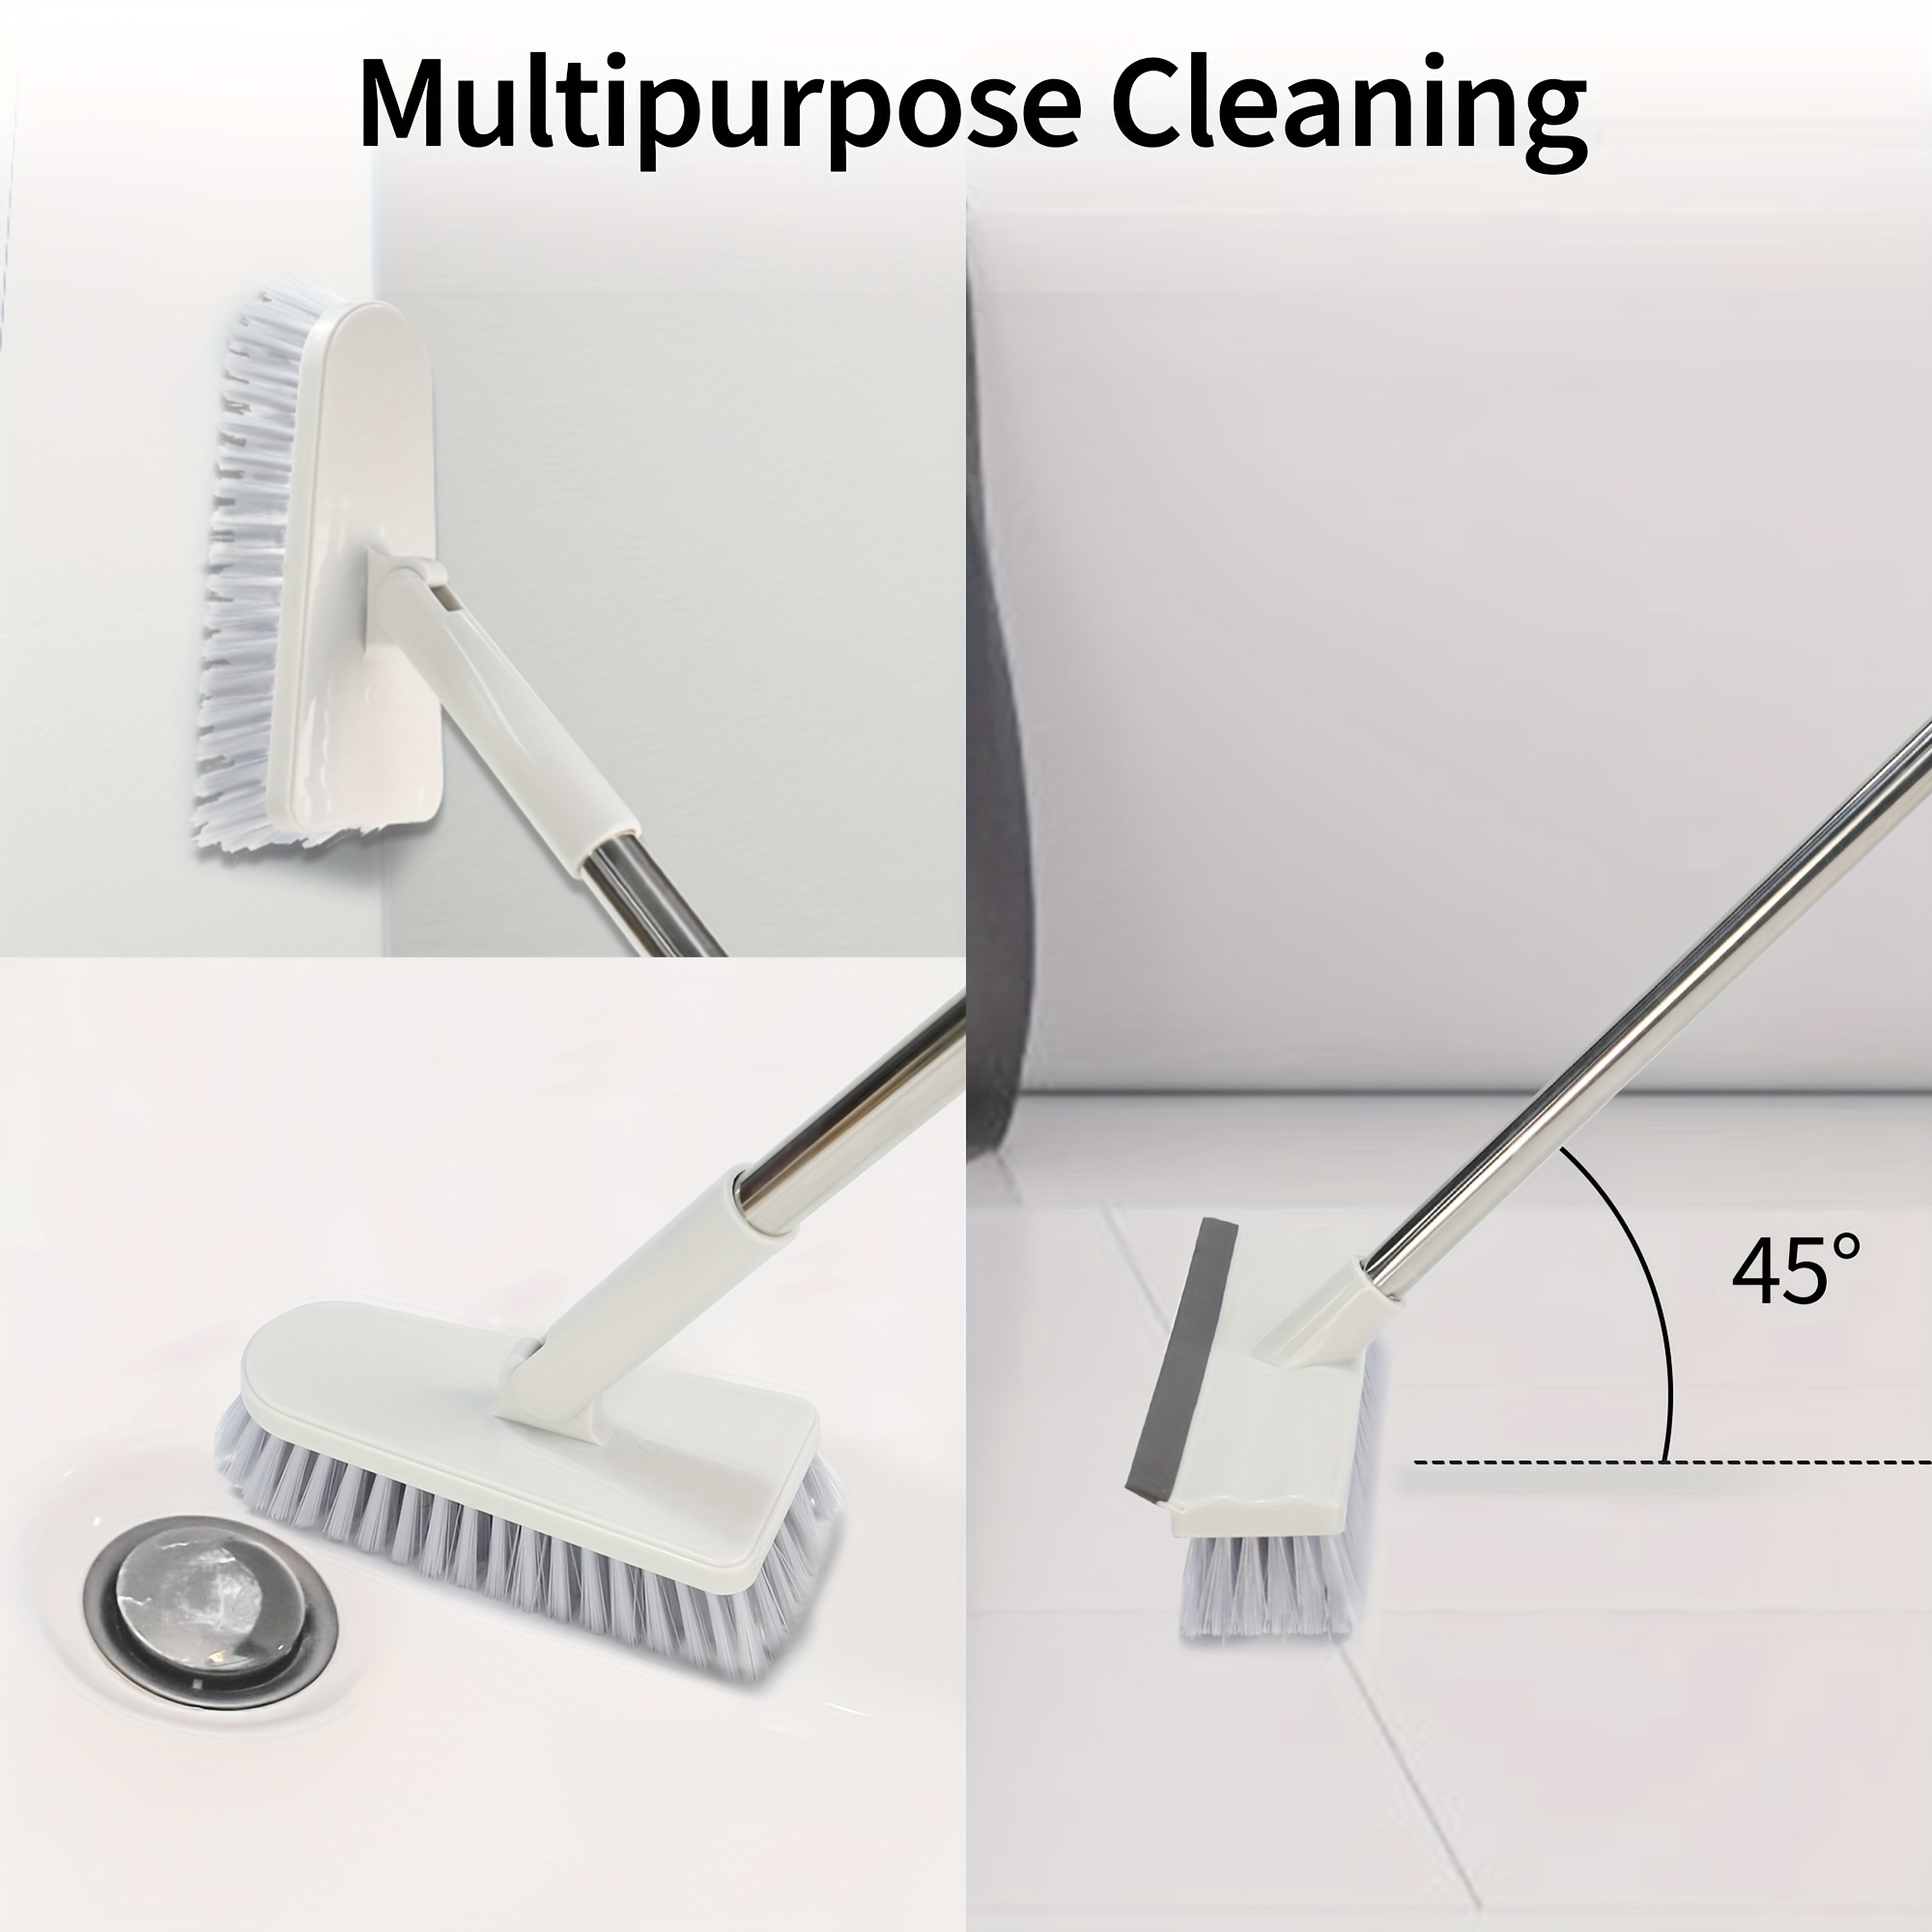 Floor Scrub Brush All Purpose Long Handle for Cleaning Tile